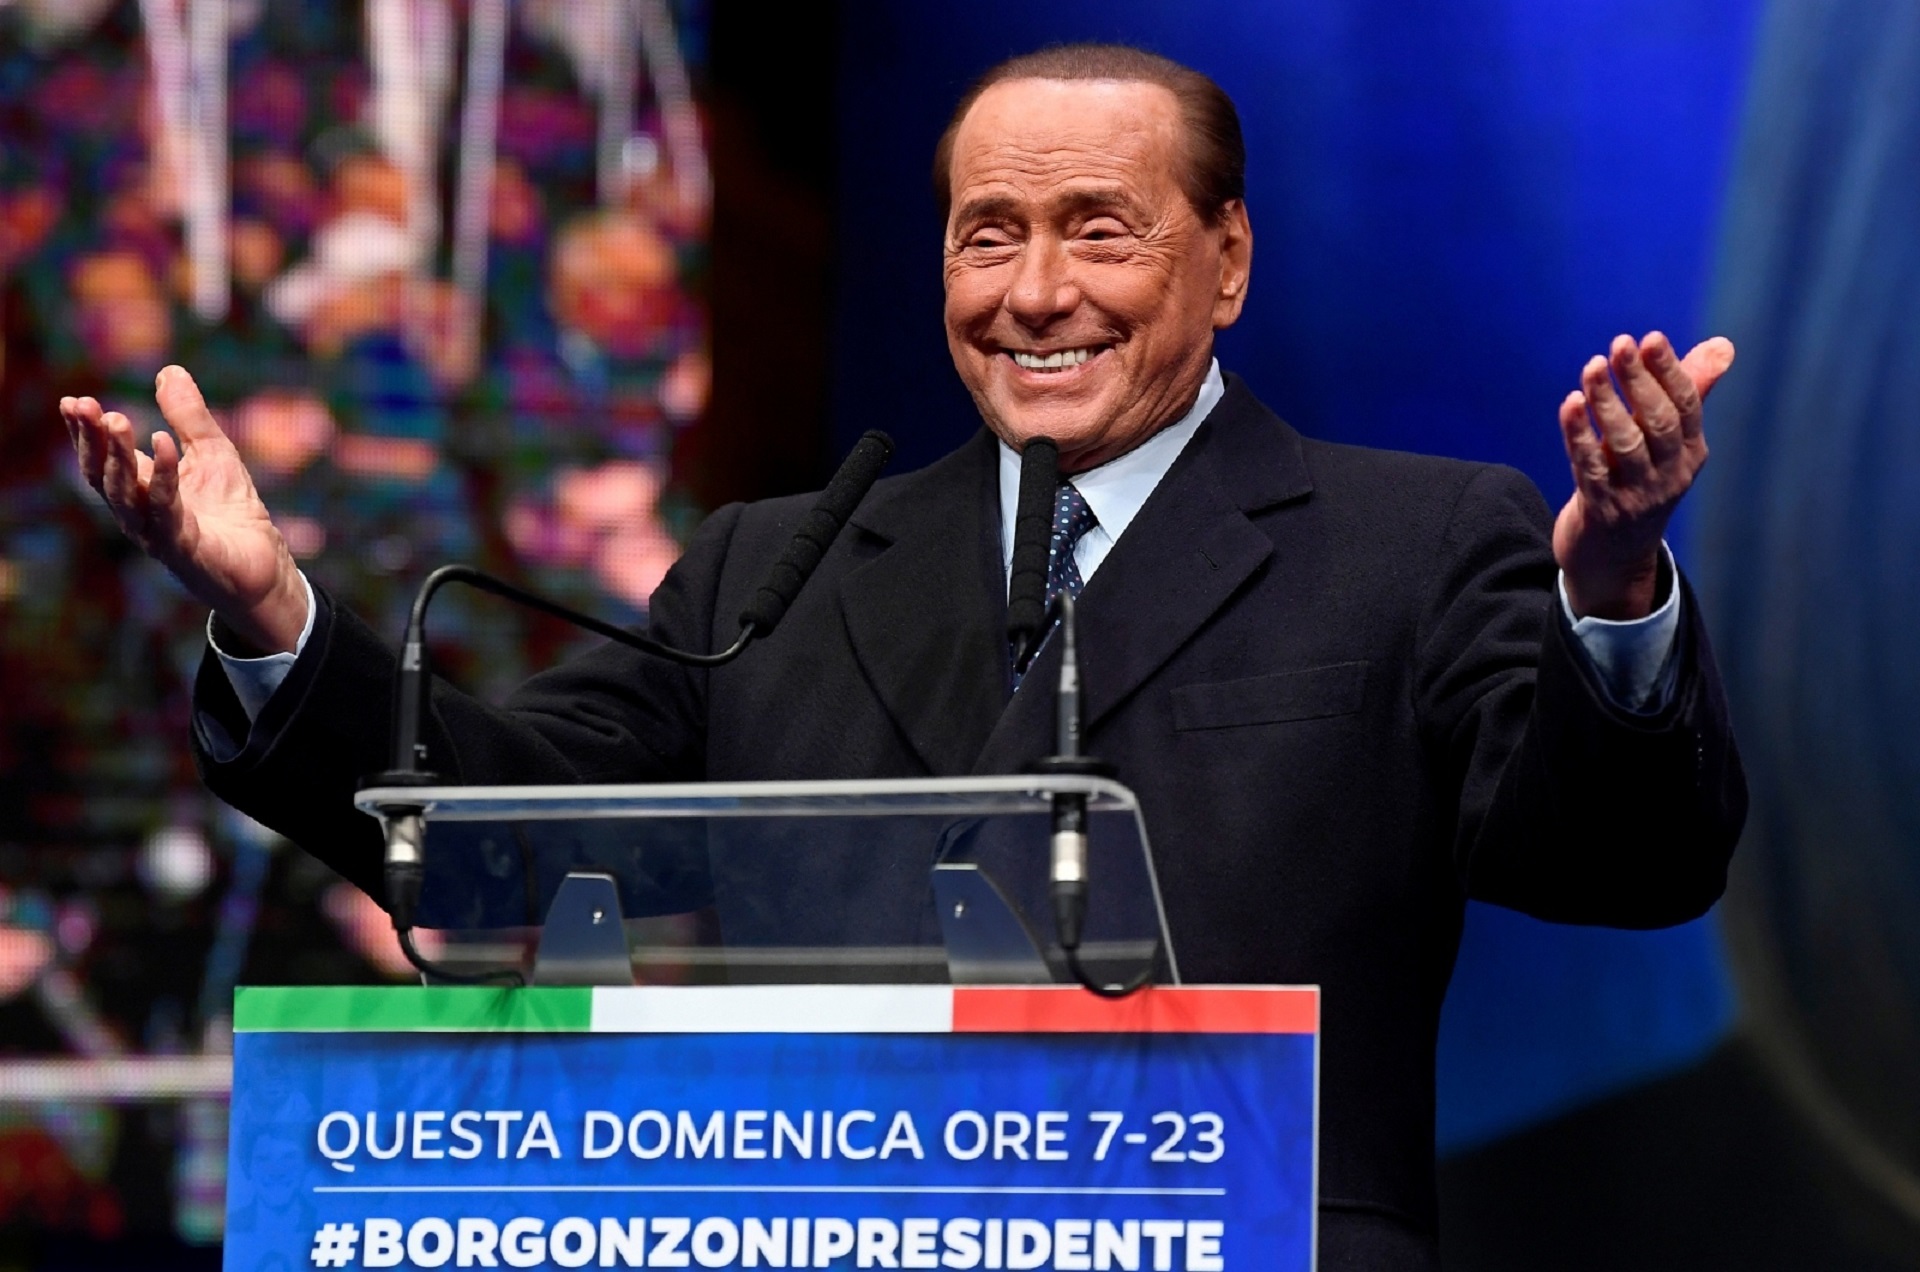 FILE PHOTO: Former Italian Prime Minister and leader of the Forza Italia party Silvio Berlusconi gestures during a rally ahead of a regional election in Emilia-Romagna, in Ravenna FILE PHOTO: Former Italian Prime Minister and leader of the Forza Italia (Go Italy!) party Silvio Berlusconi gestures during a rally ahead of a regional election in Emilia-Romagna, in Ravenna, Italy, January 24, 2020. REUTERS/Flavio Lo Scalzo/File Photo Flavio Lo Scalzo